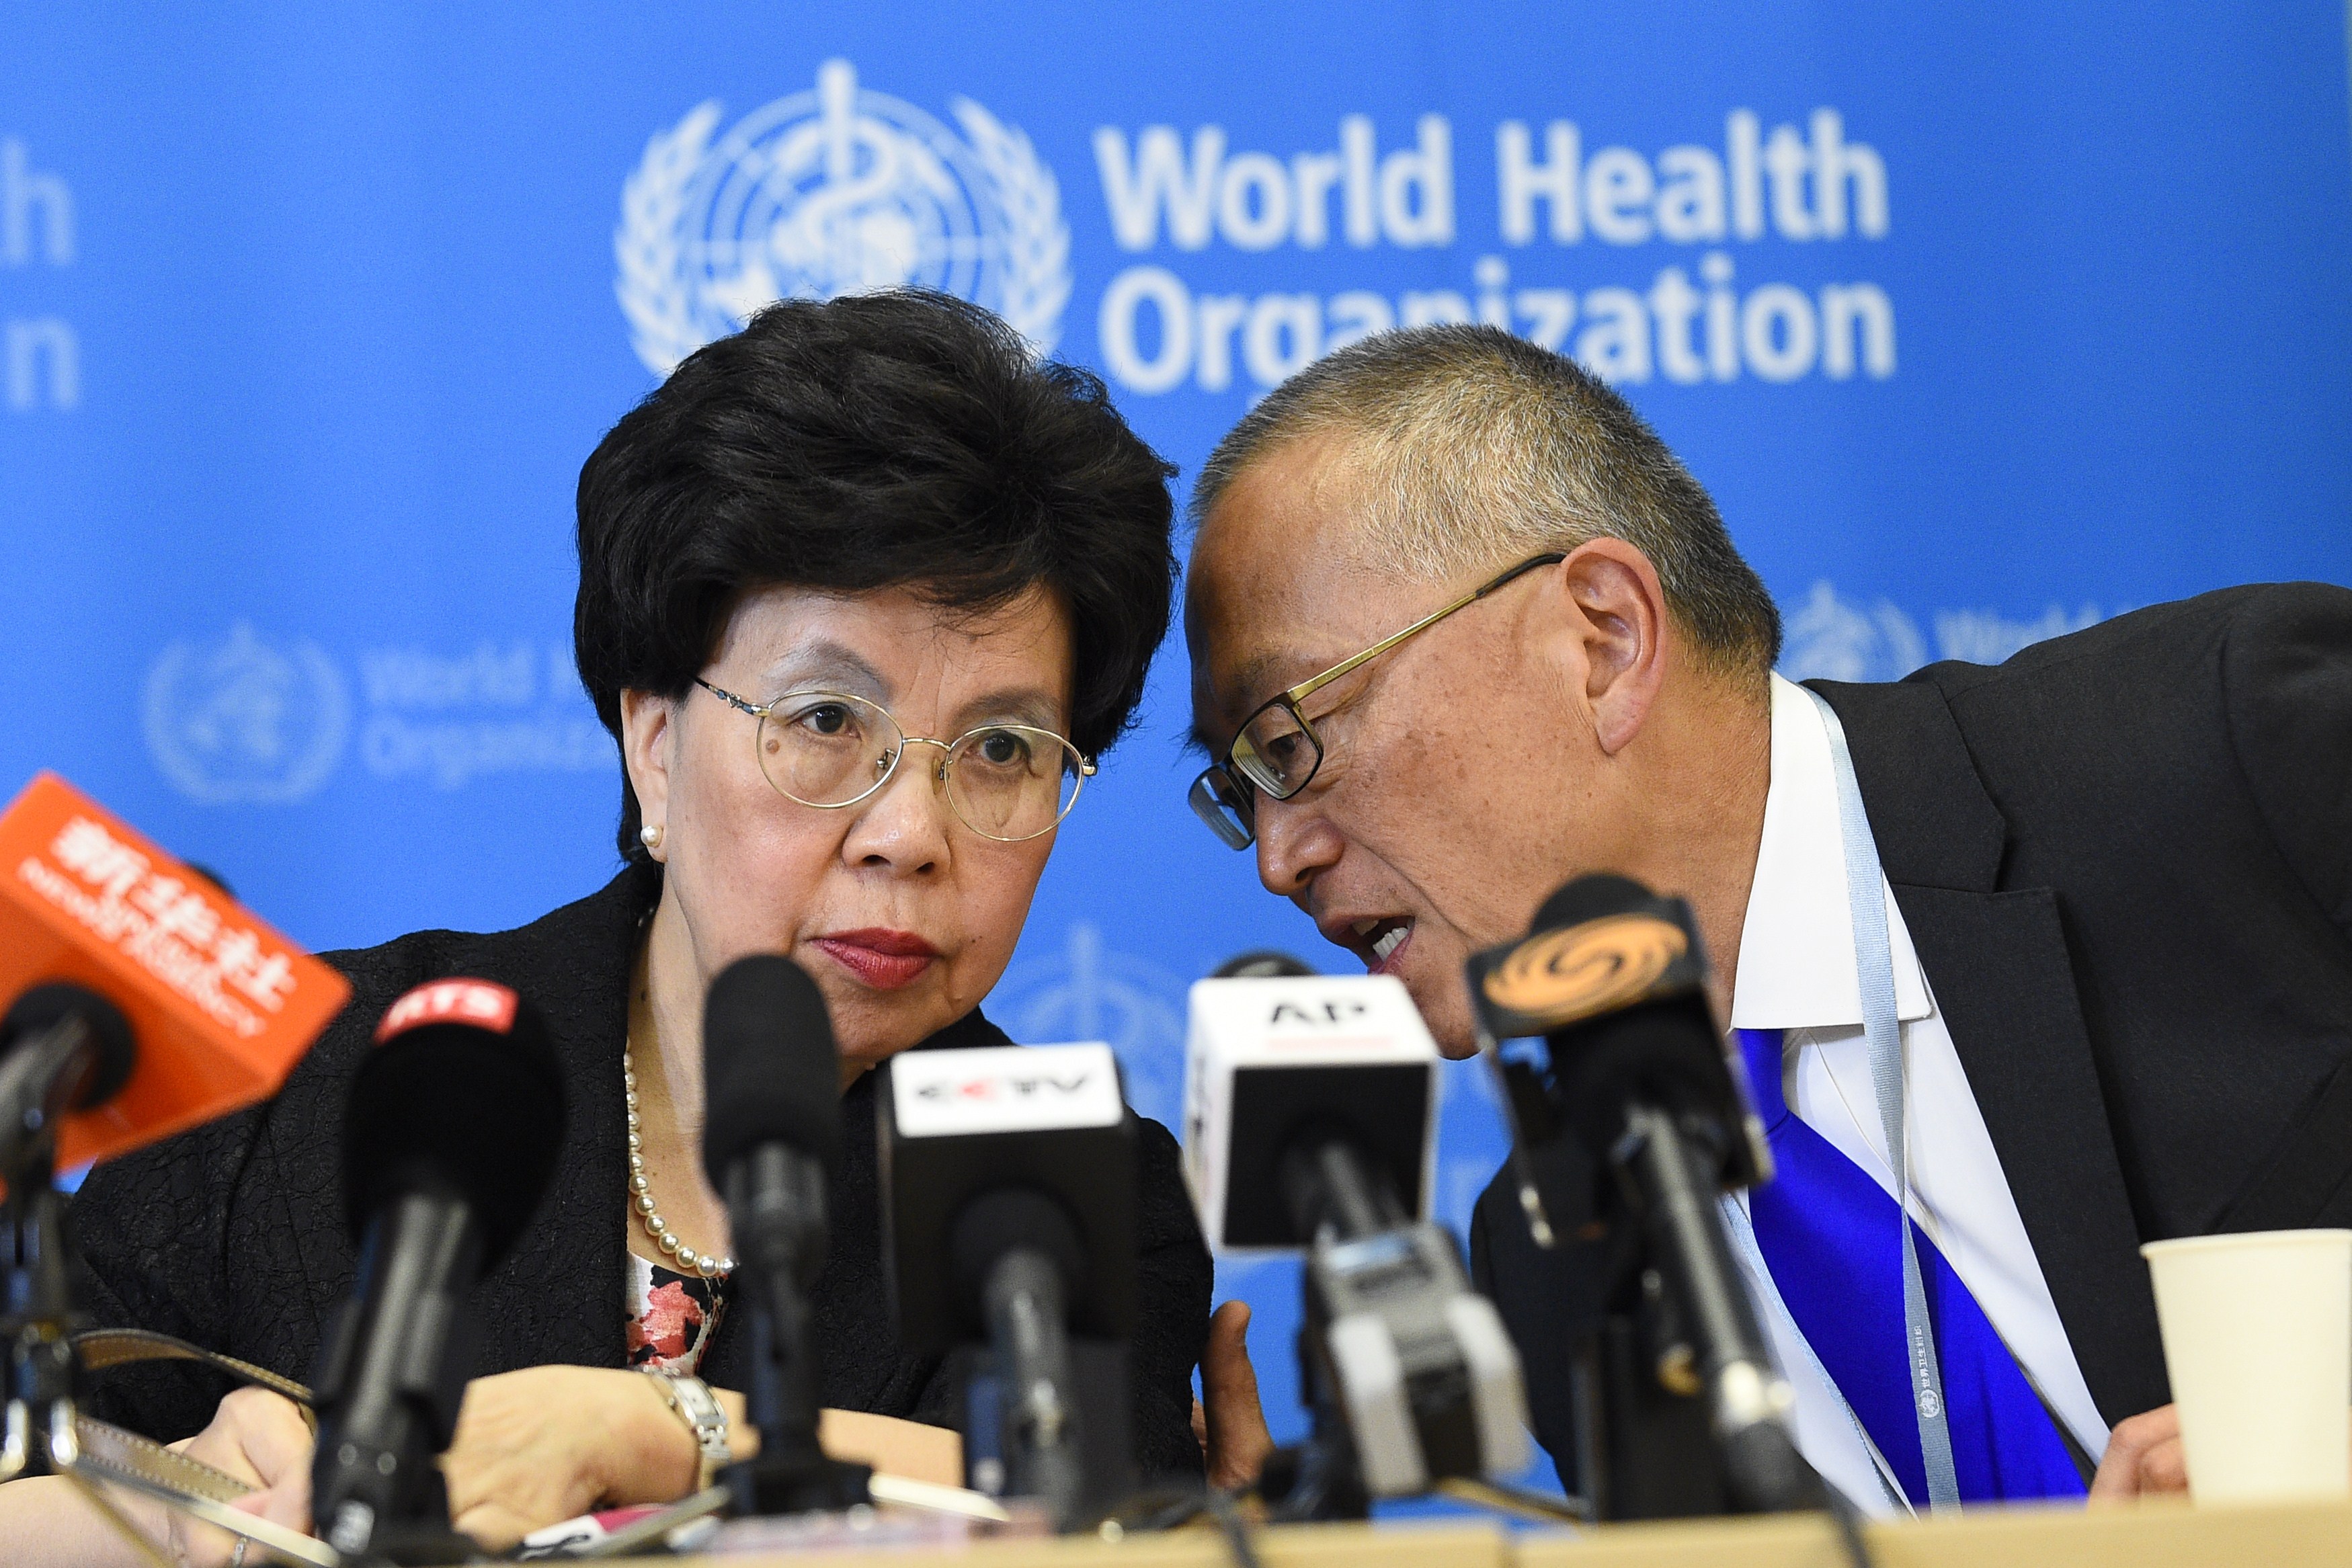 World Health Organization Director-General Dr. Margaret Chan with assistant director-general for health security Keiji Fukuda  on Aug. 8, 2014 in Geneva. (Alain Grosclaude—AFP/Getty Images)